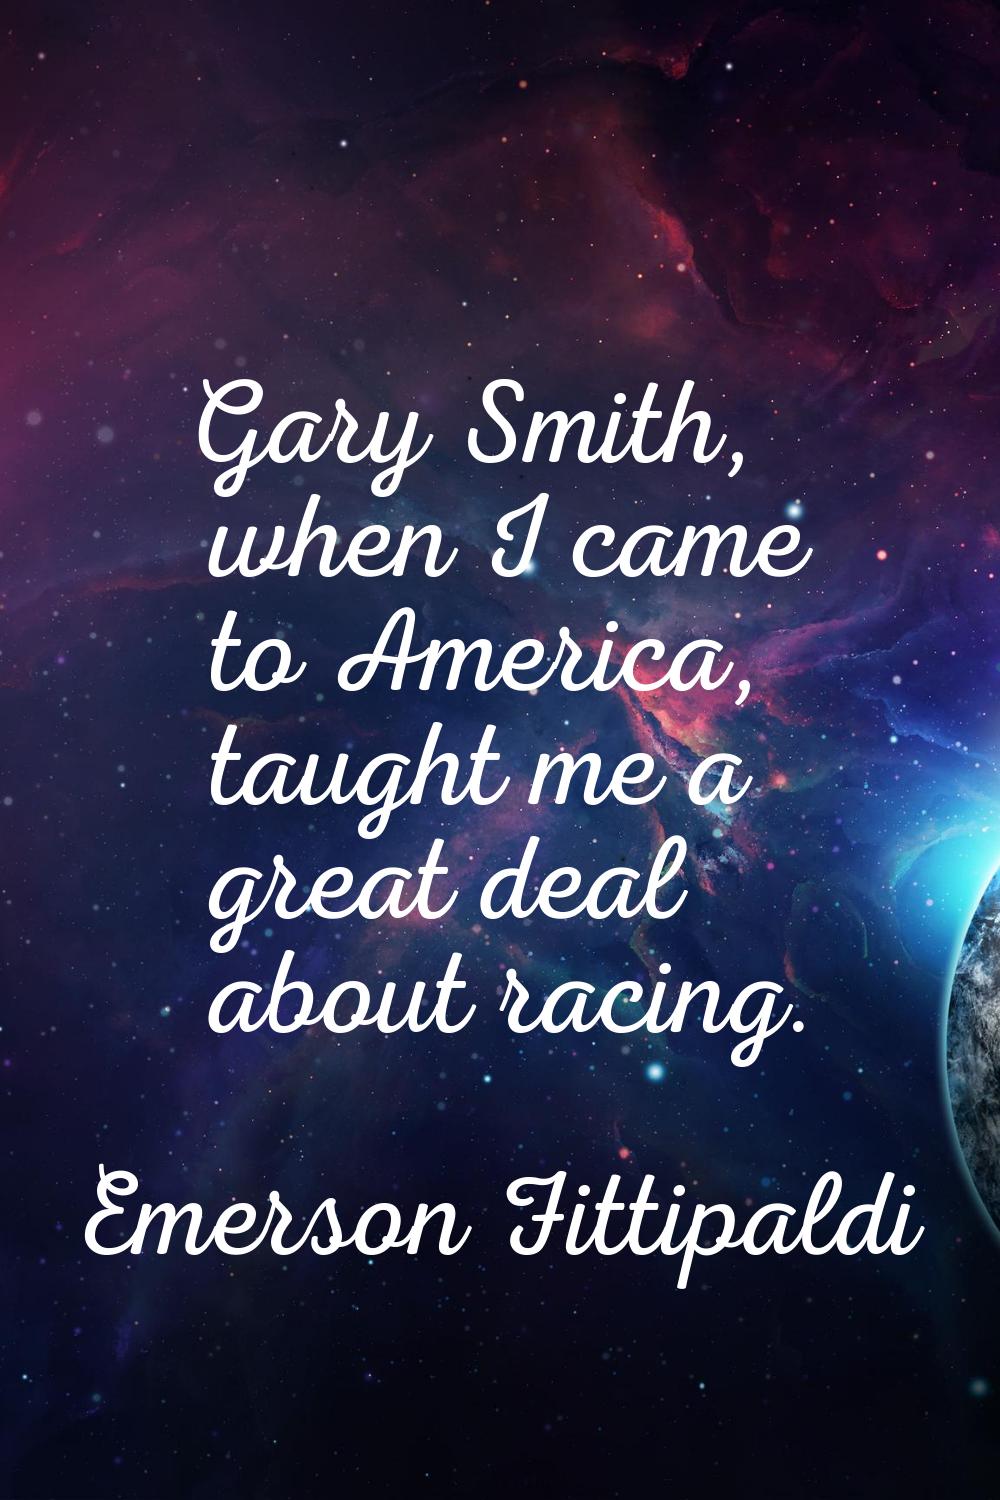 Gary Smith, when I came to America, taught me a great deal about racing.